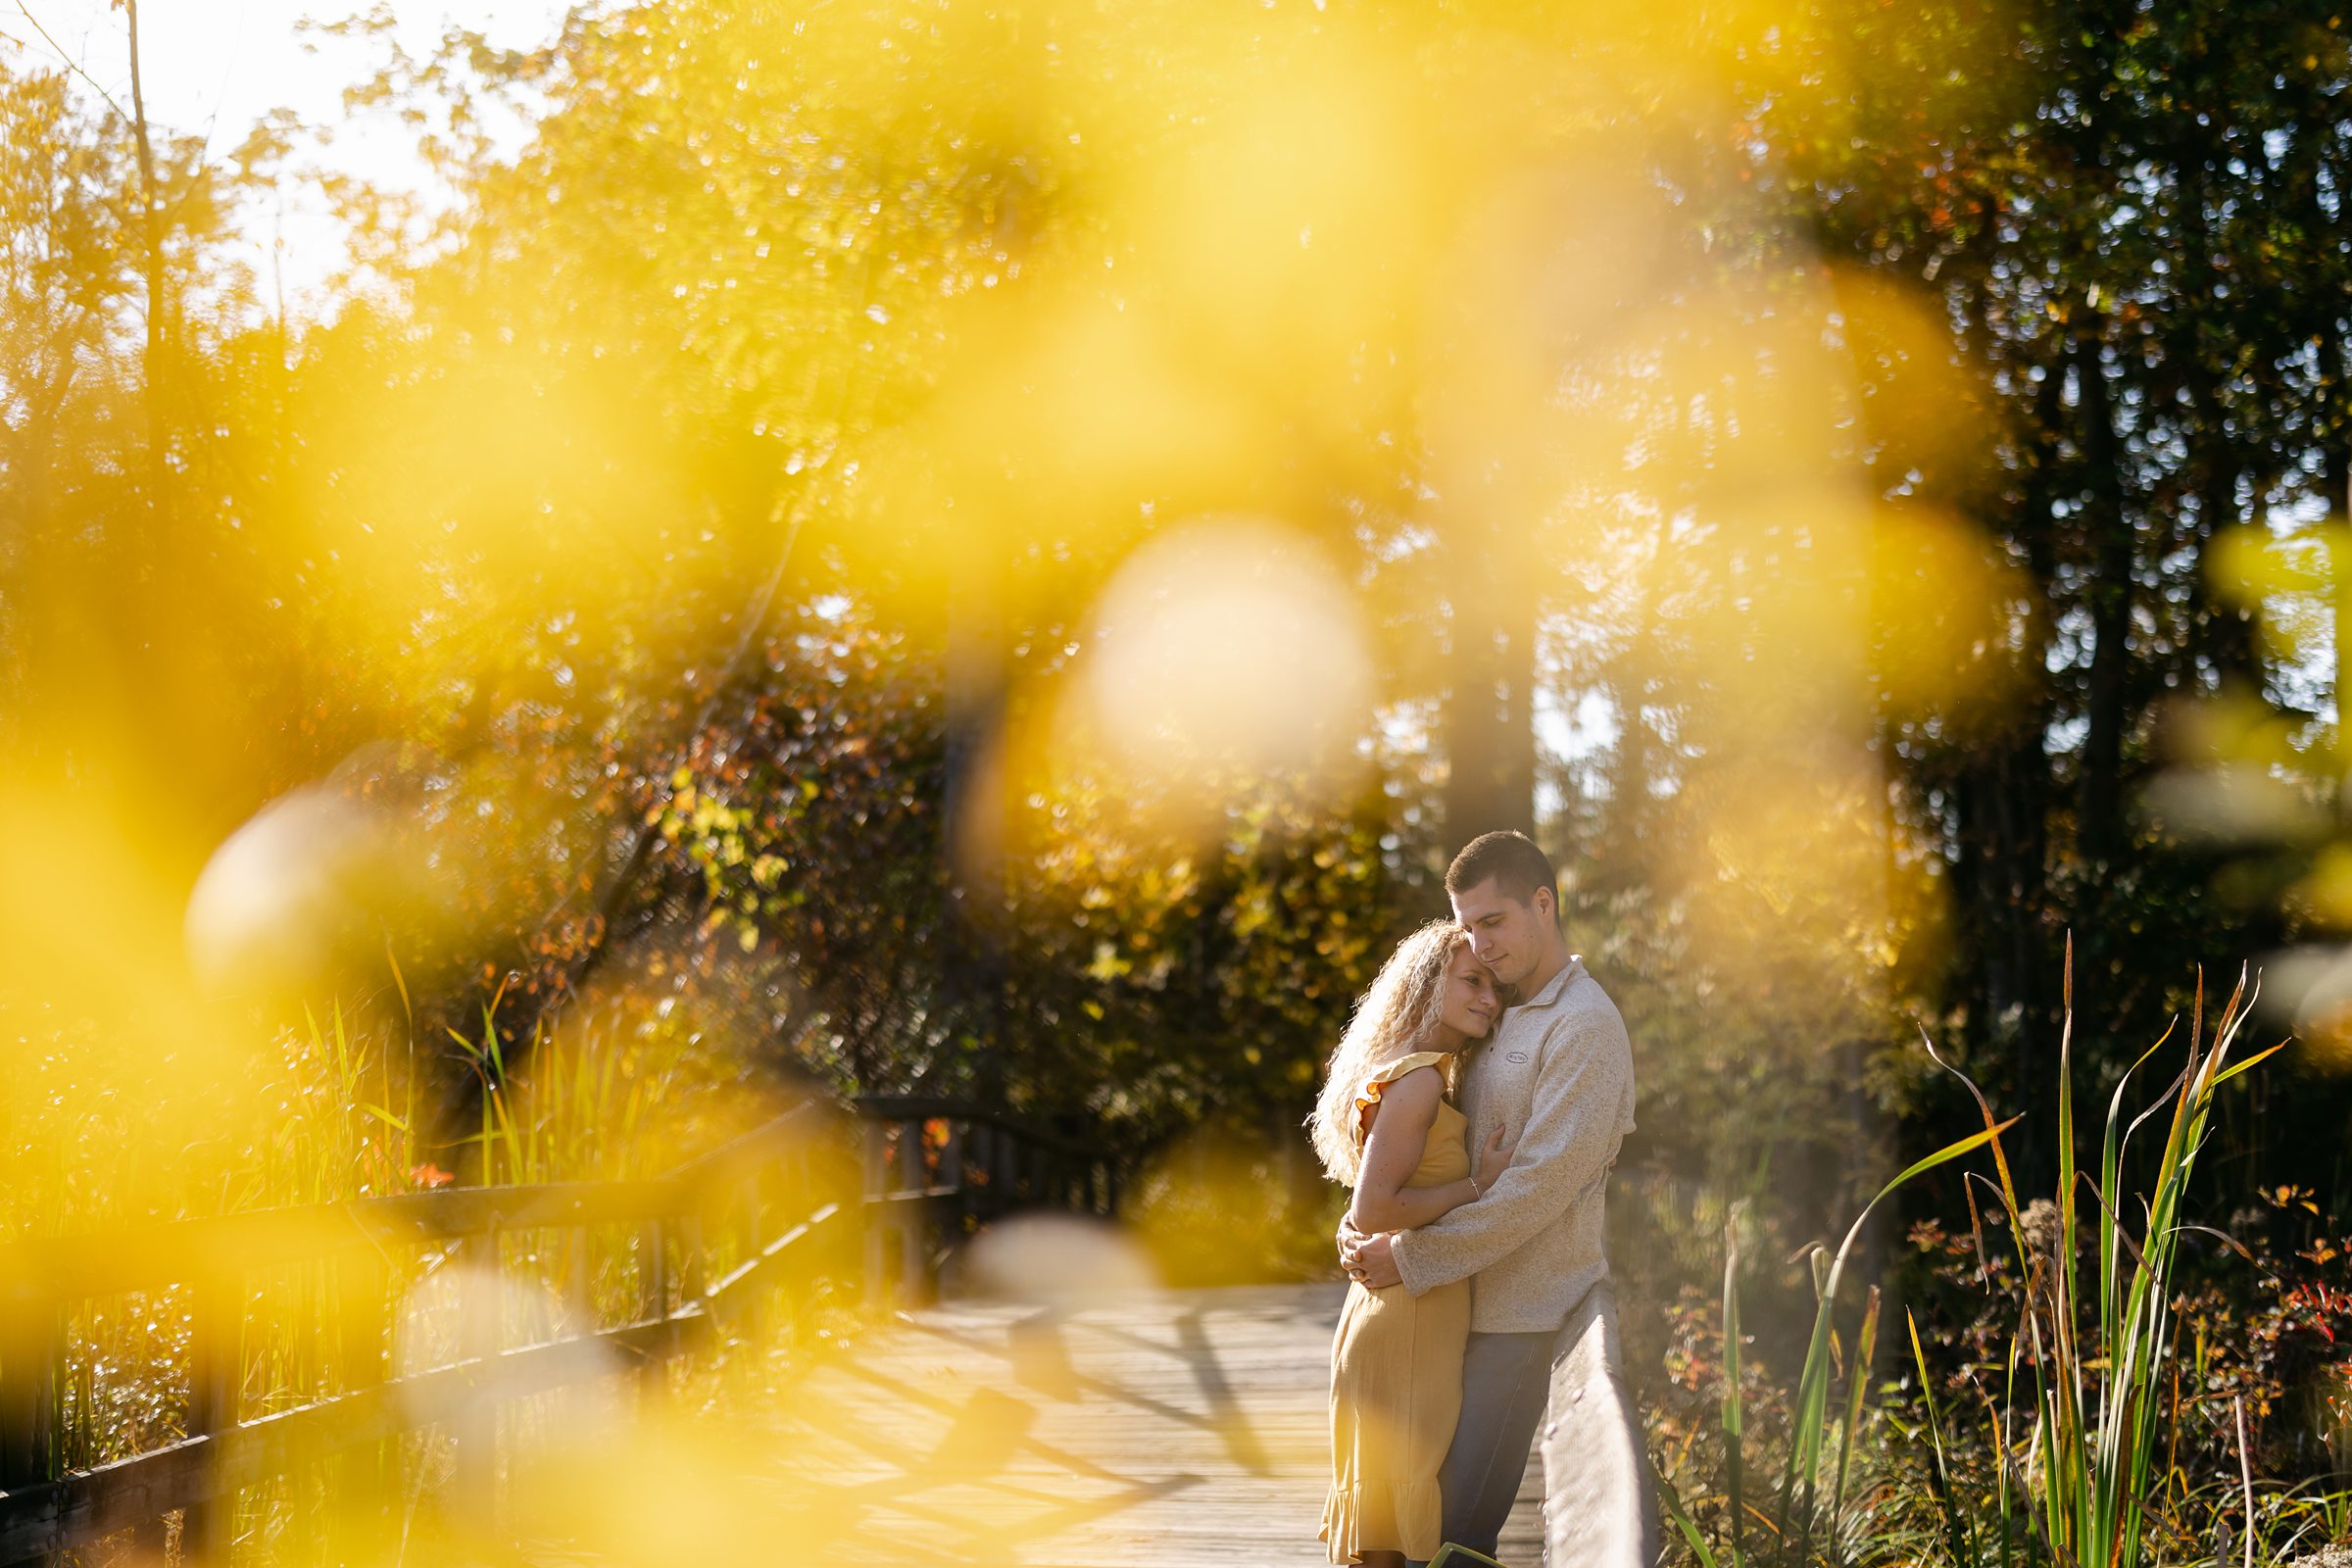 CoupCouple cuddling during their engagement session near the fall leaves at Kensington Metropark in Milford Michigan by Michele Maloney Photography